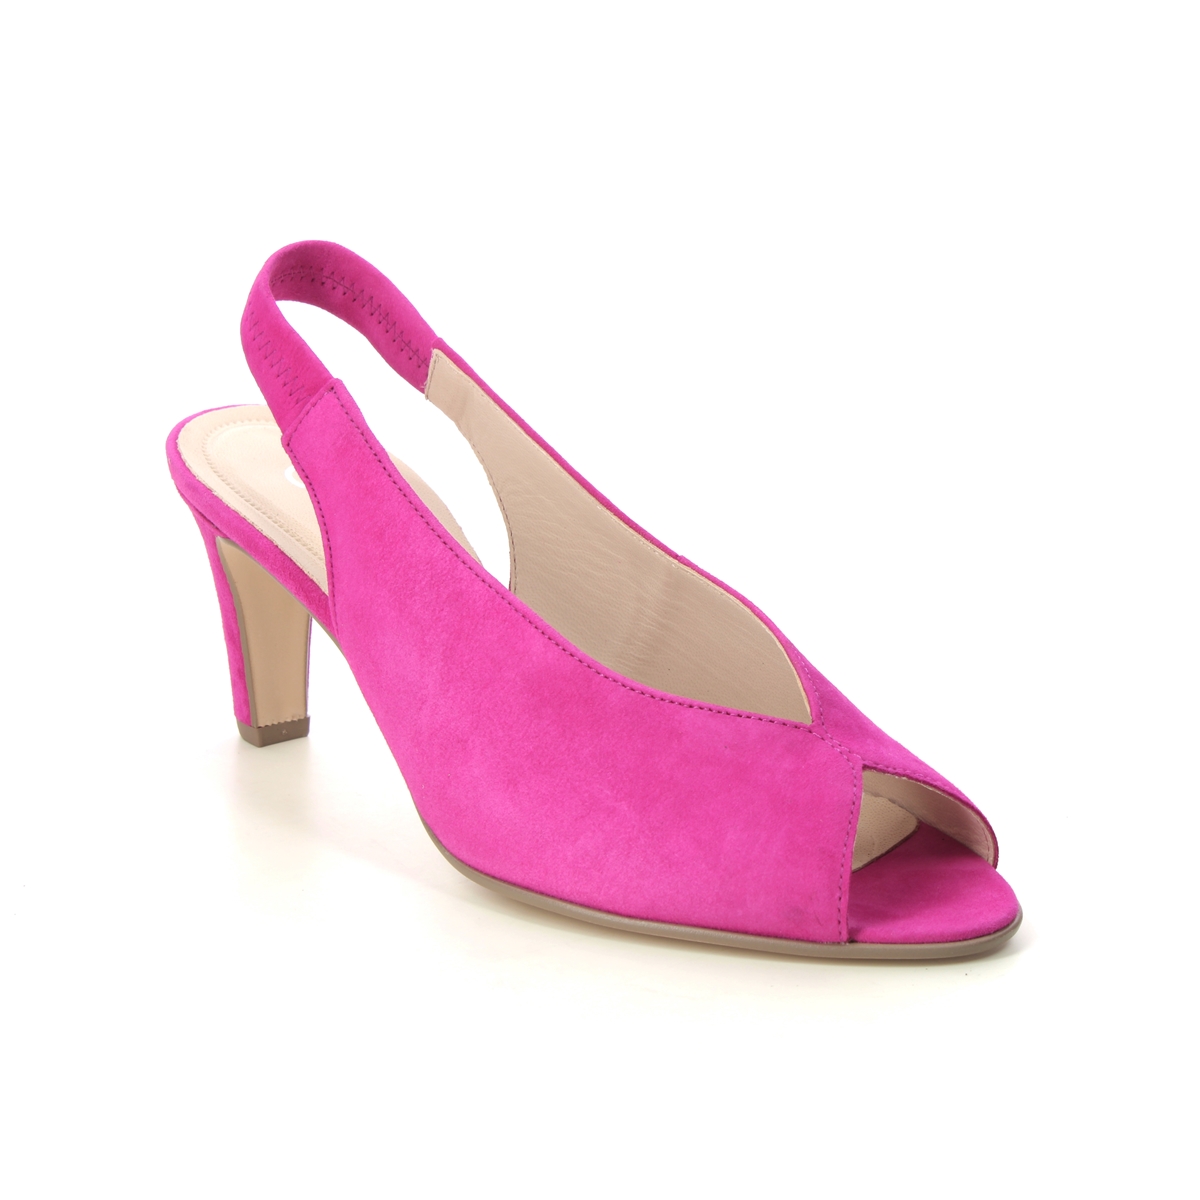 Gabor Eternity Fuchsia Suede Womens Slingback Shoes 41.800.13 in a Plain Leather in Size 7